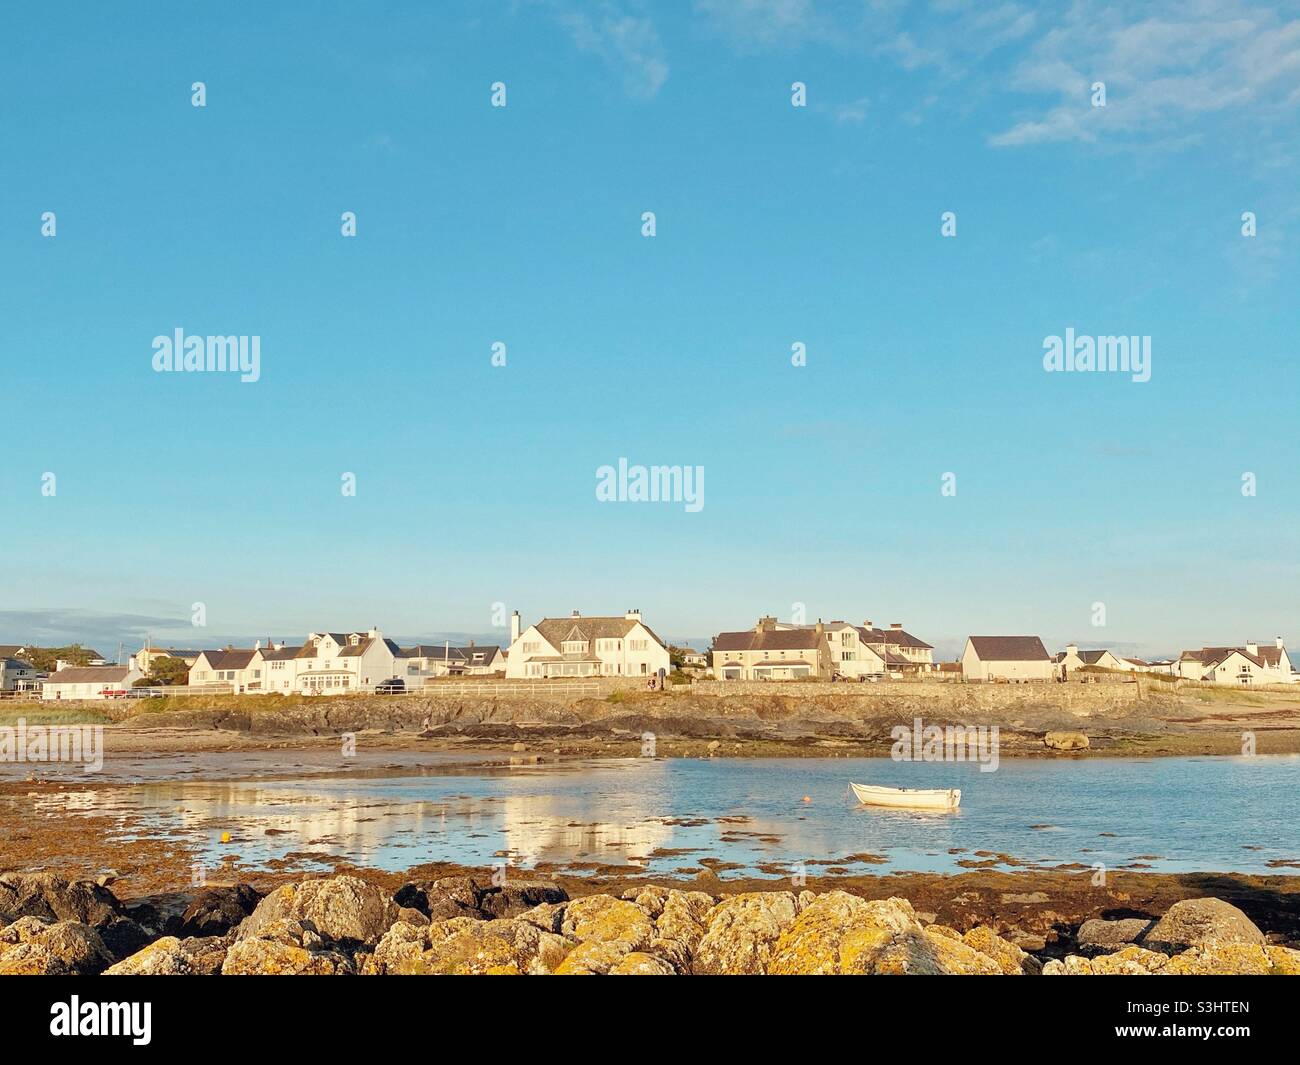 Rhosneigr beach early evening in late August as the sun sets over the houses, looking back at the village from the beach across the boat pool, Anglesey, North Wales, UK Stock Photo